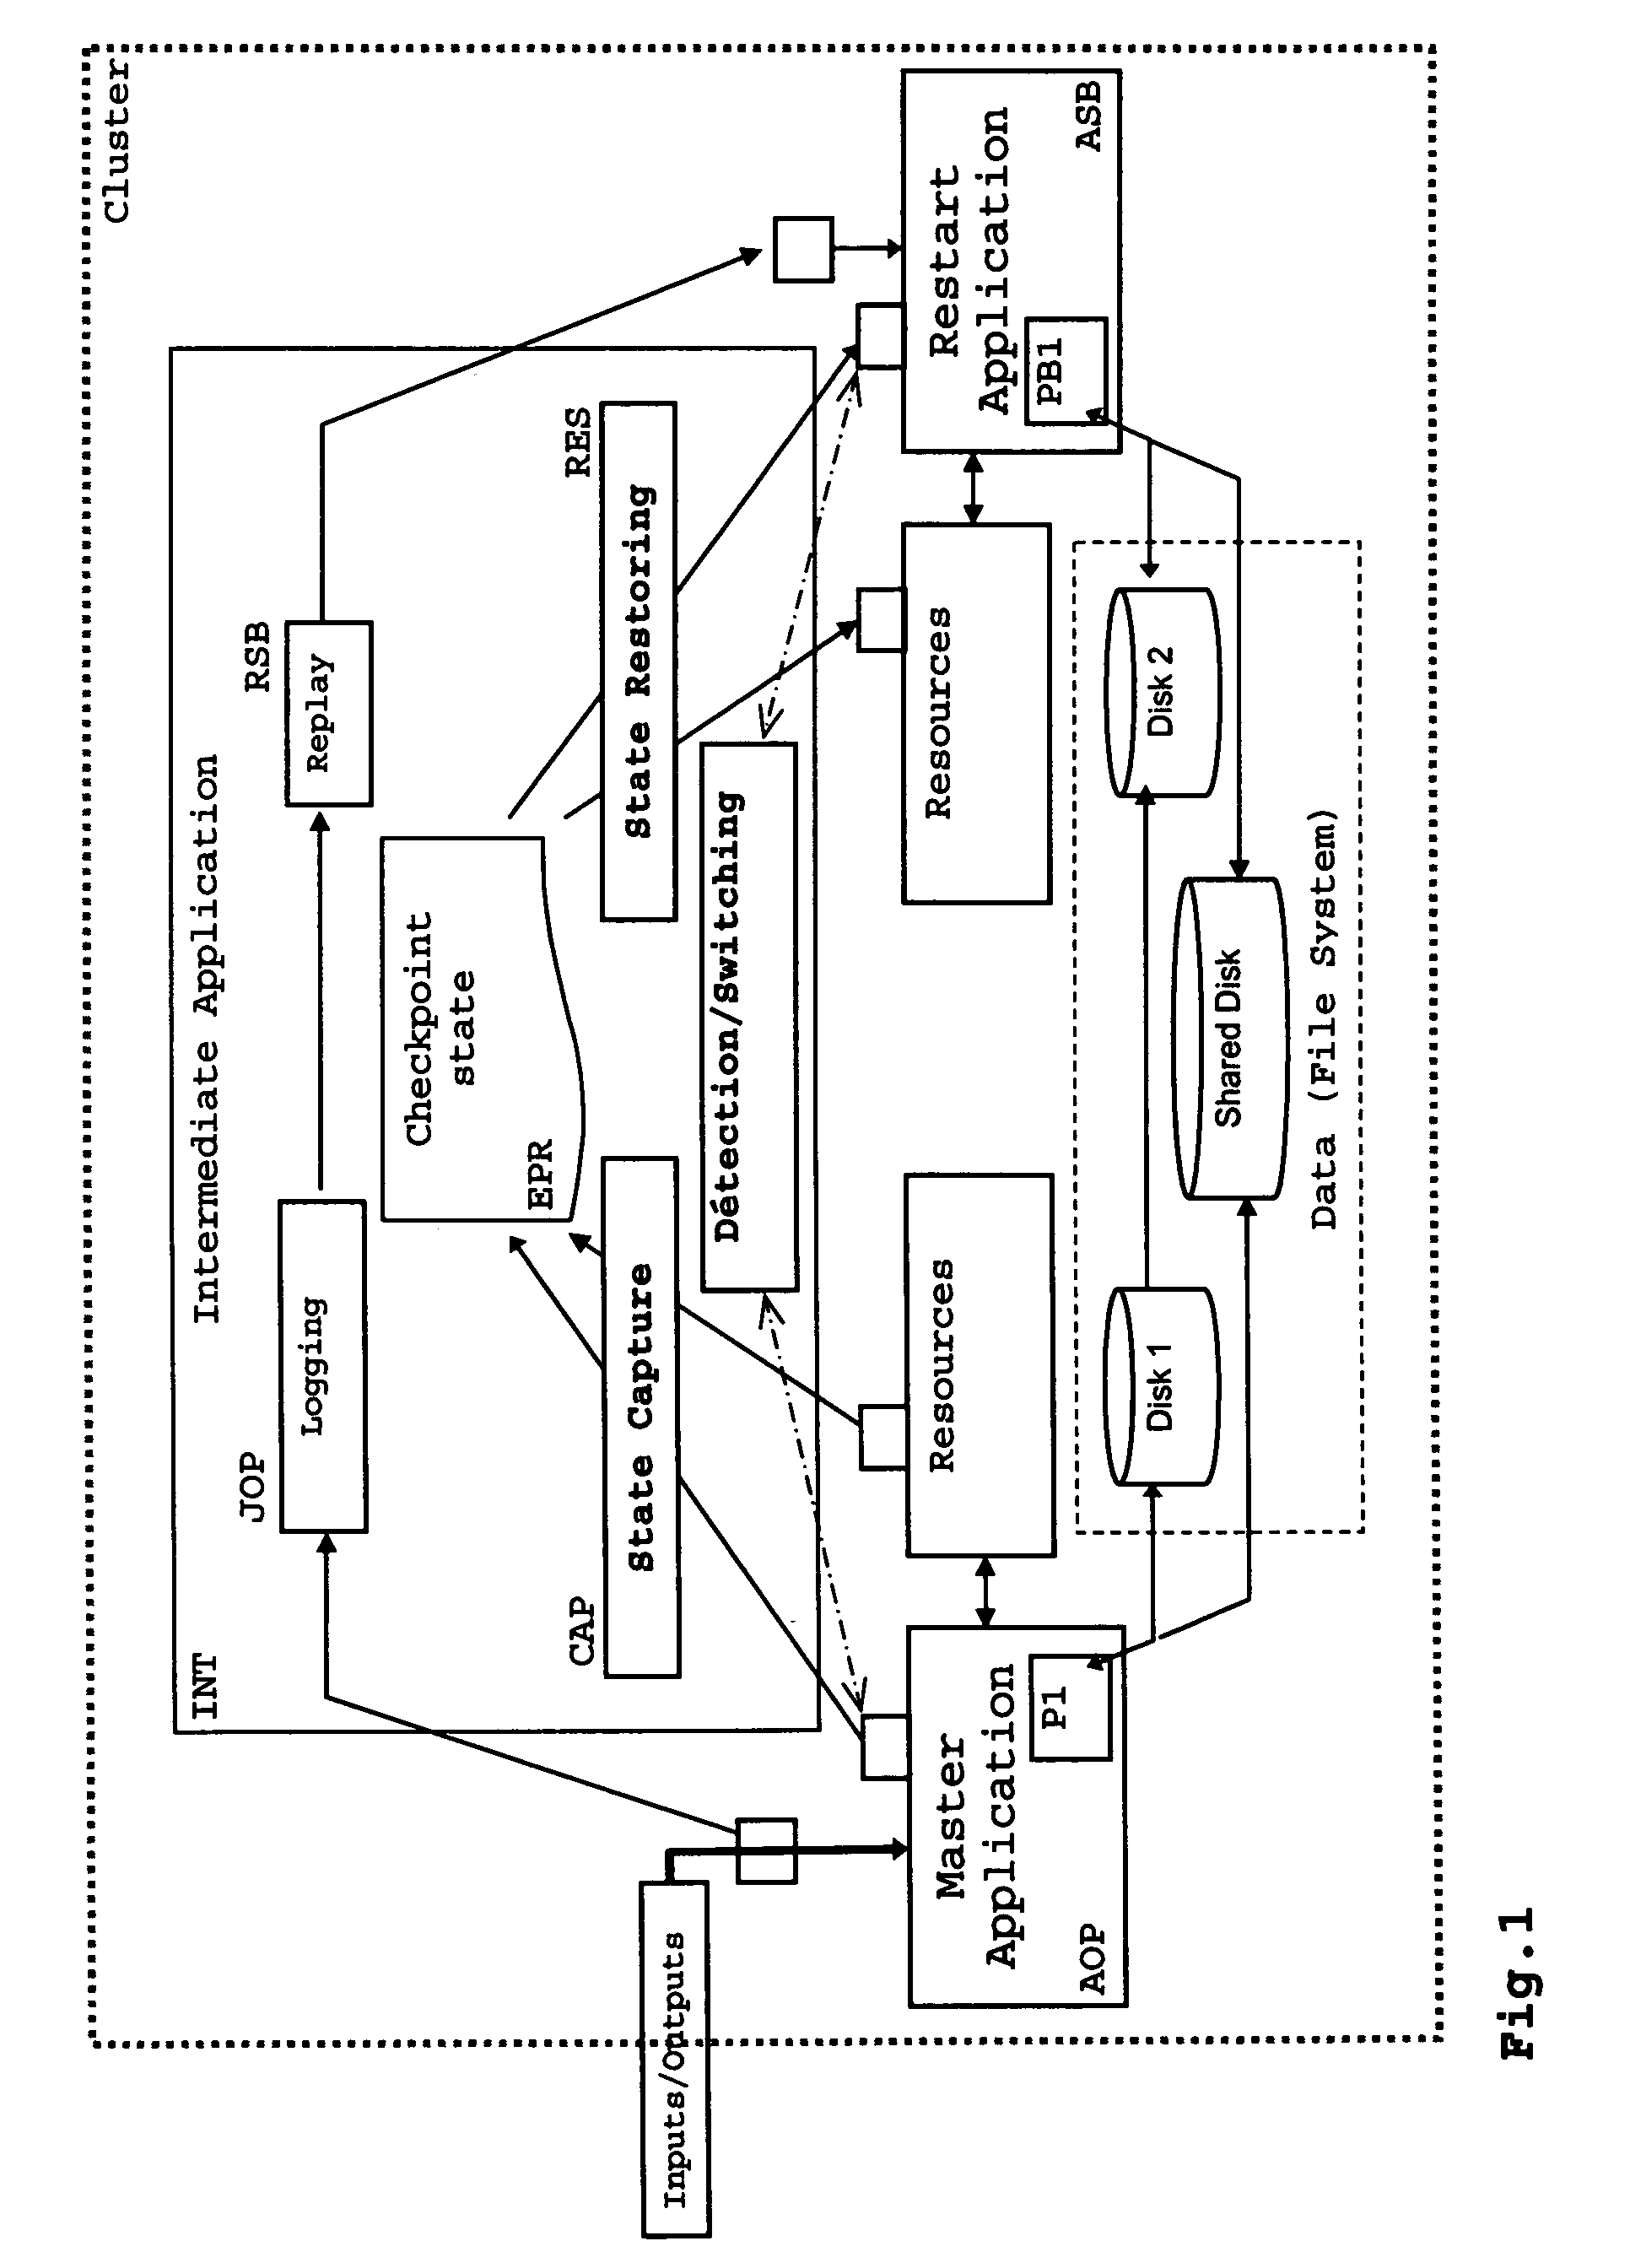 Method for the management, logging or replay of the execution of an application process